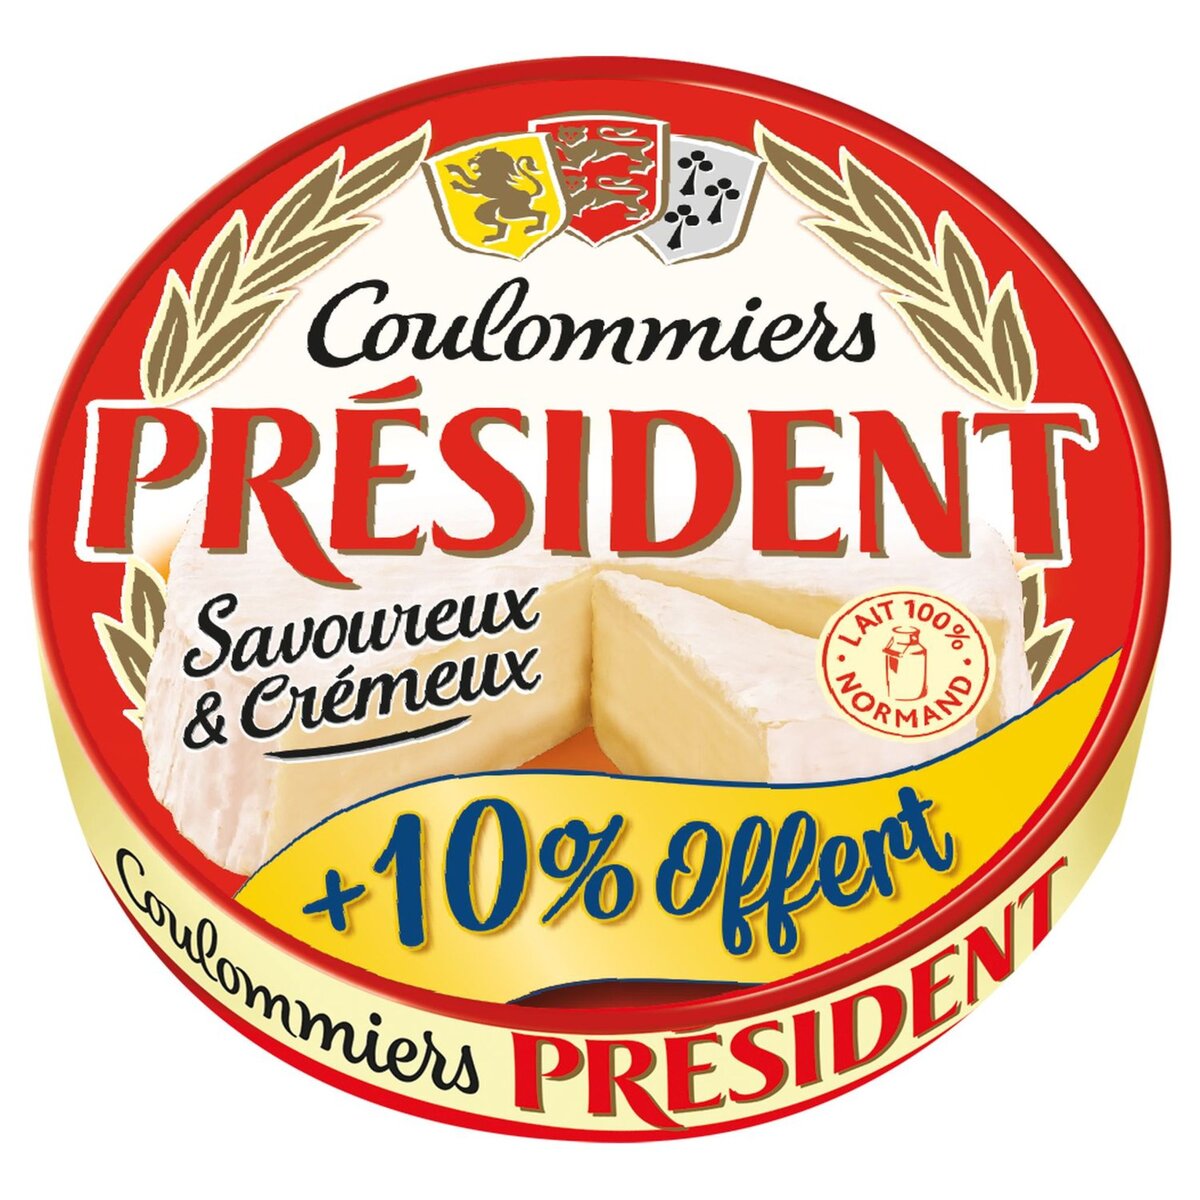 PRESIDENT Coulommiers 385g